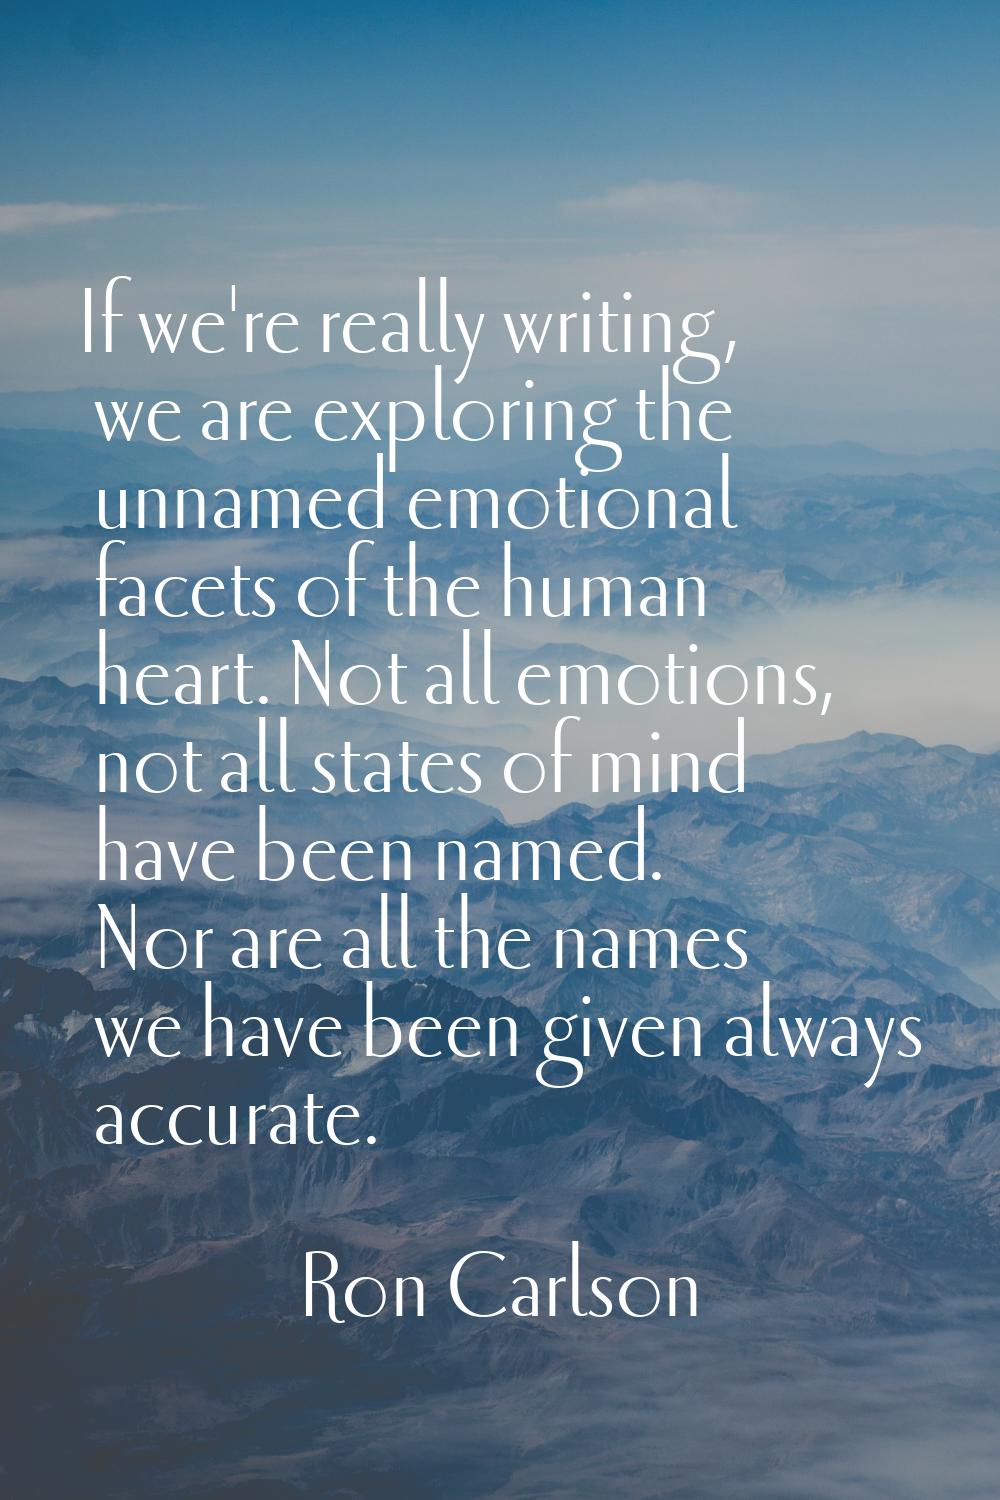 If we're really writing, we are exploring the unnamed emotional facets of the human heart. Not all 